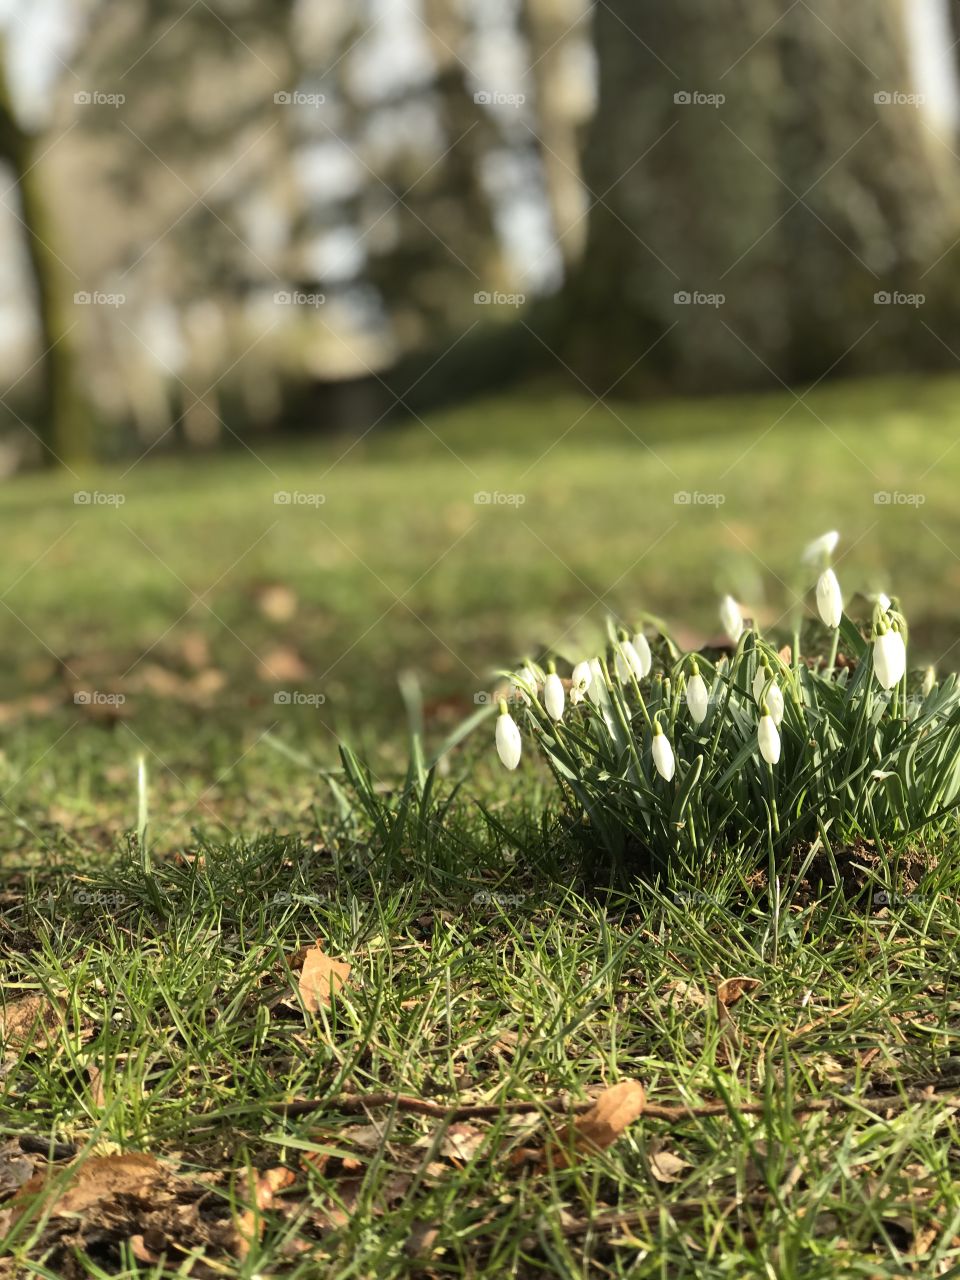 Little white Snowdrops blossoming in the grass in a favourite garden park. Will be visiting tomorrow again to get my Spring On with more flower shots!